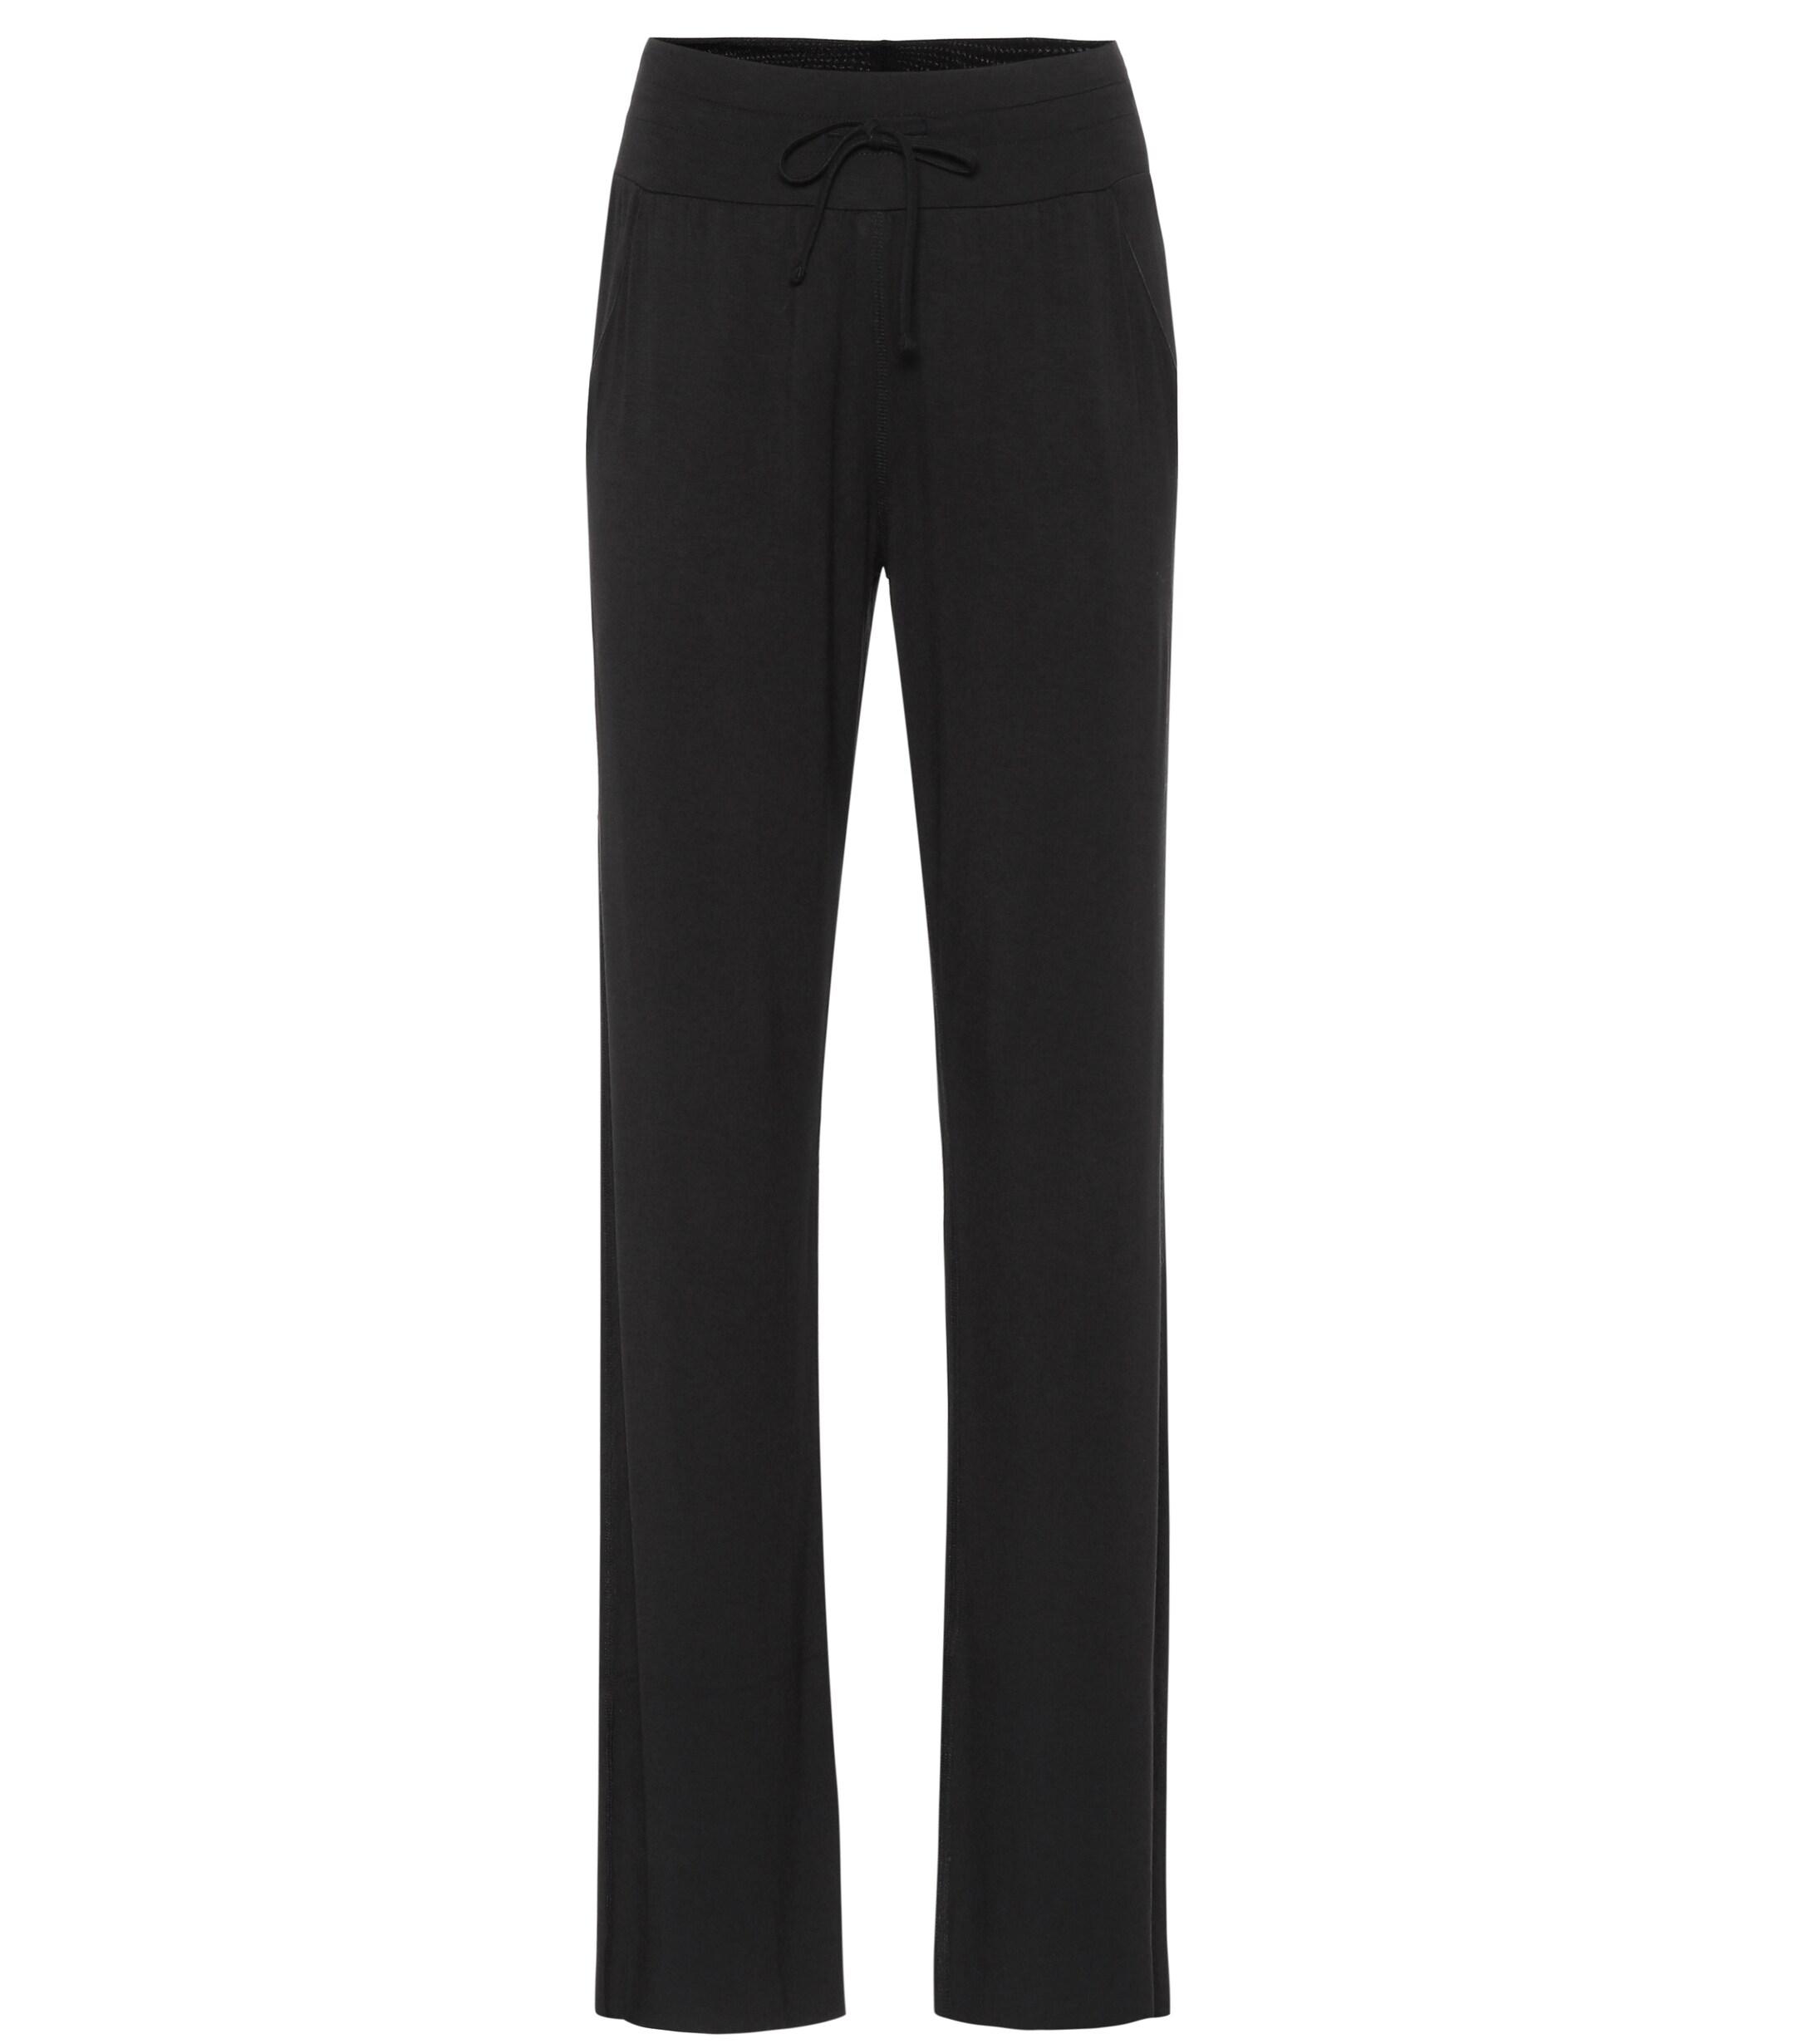 Alo Yoga Extreme High-rise Wide-leg Pants in Black - Lyst